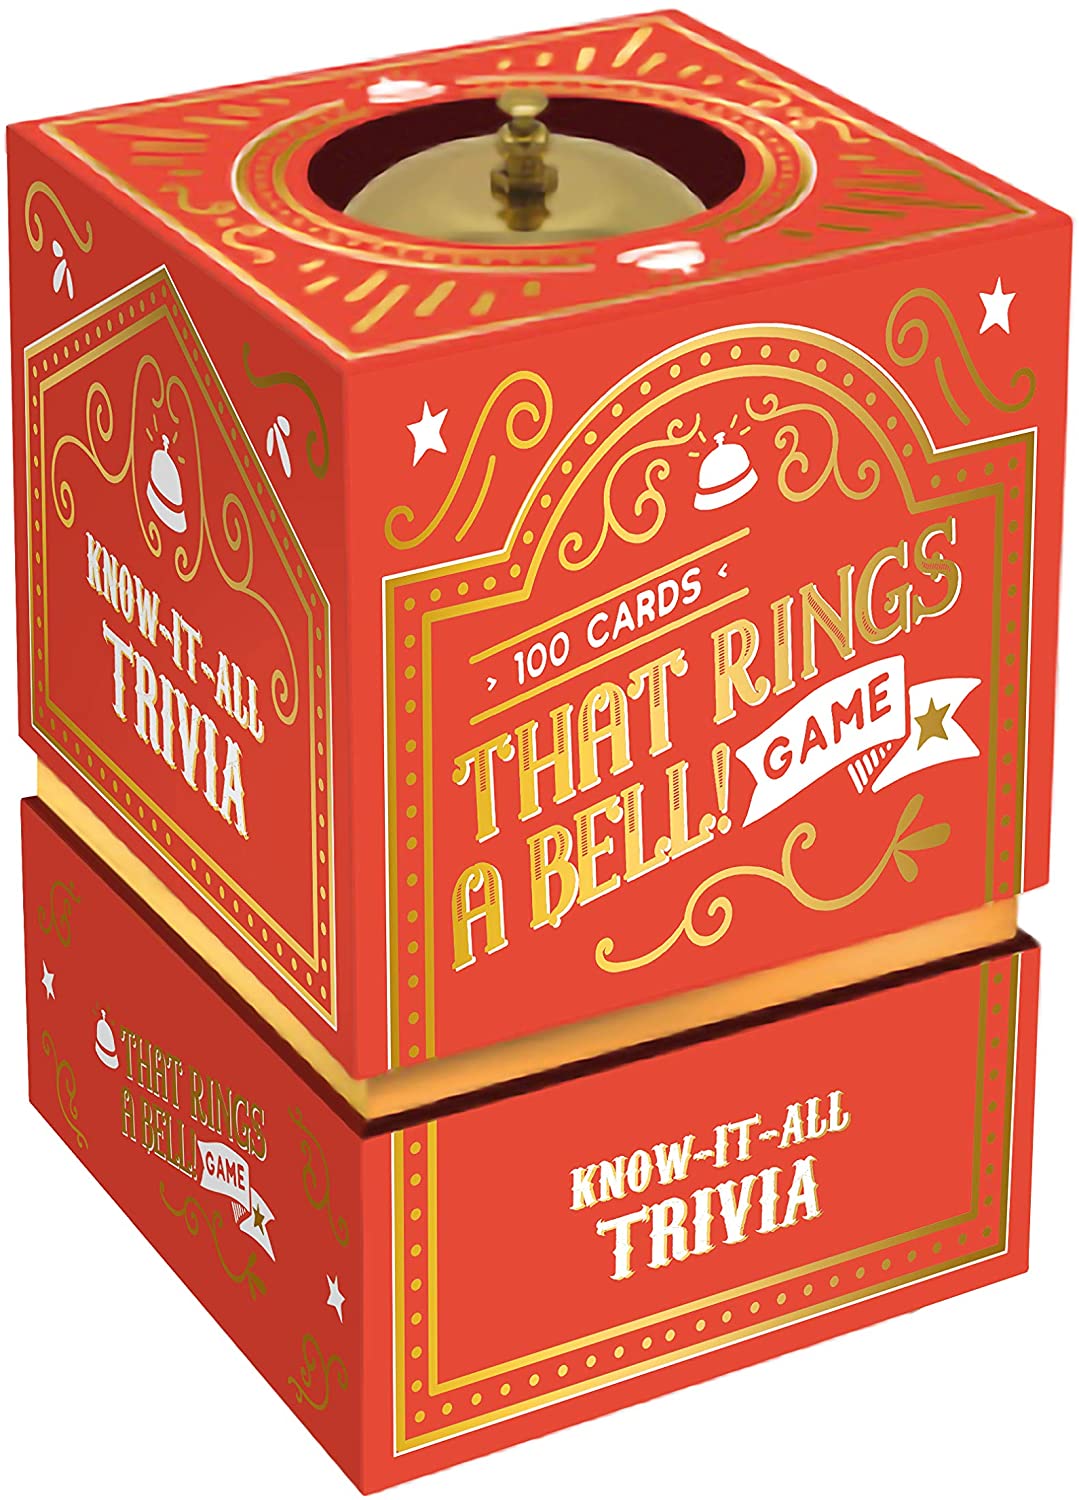 That Rings a Bell! Game KnowItAll Trivia